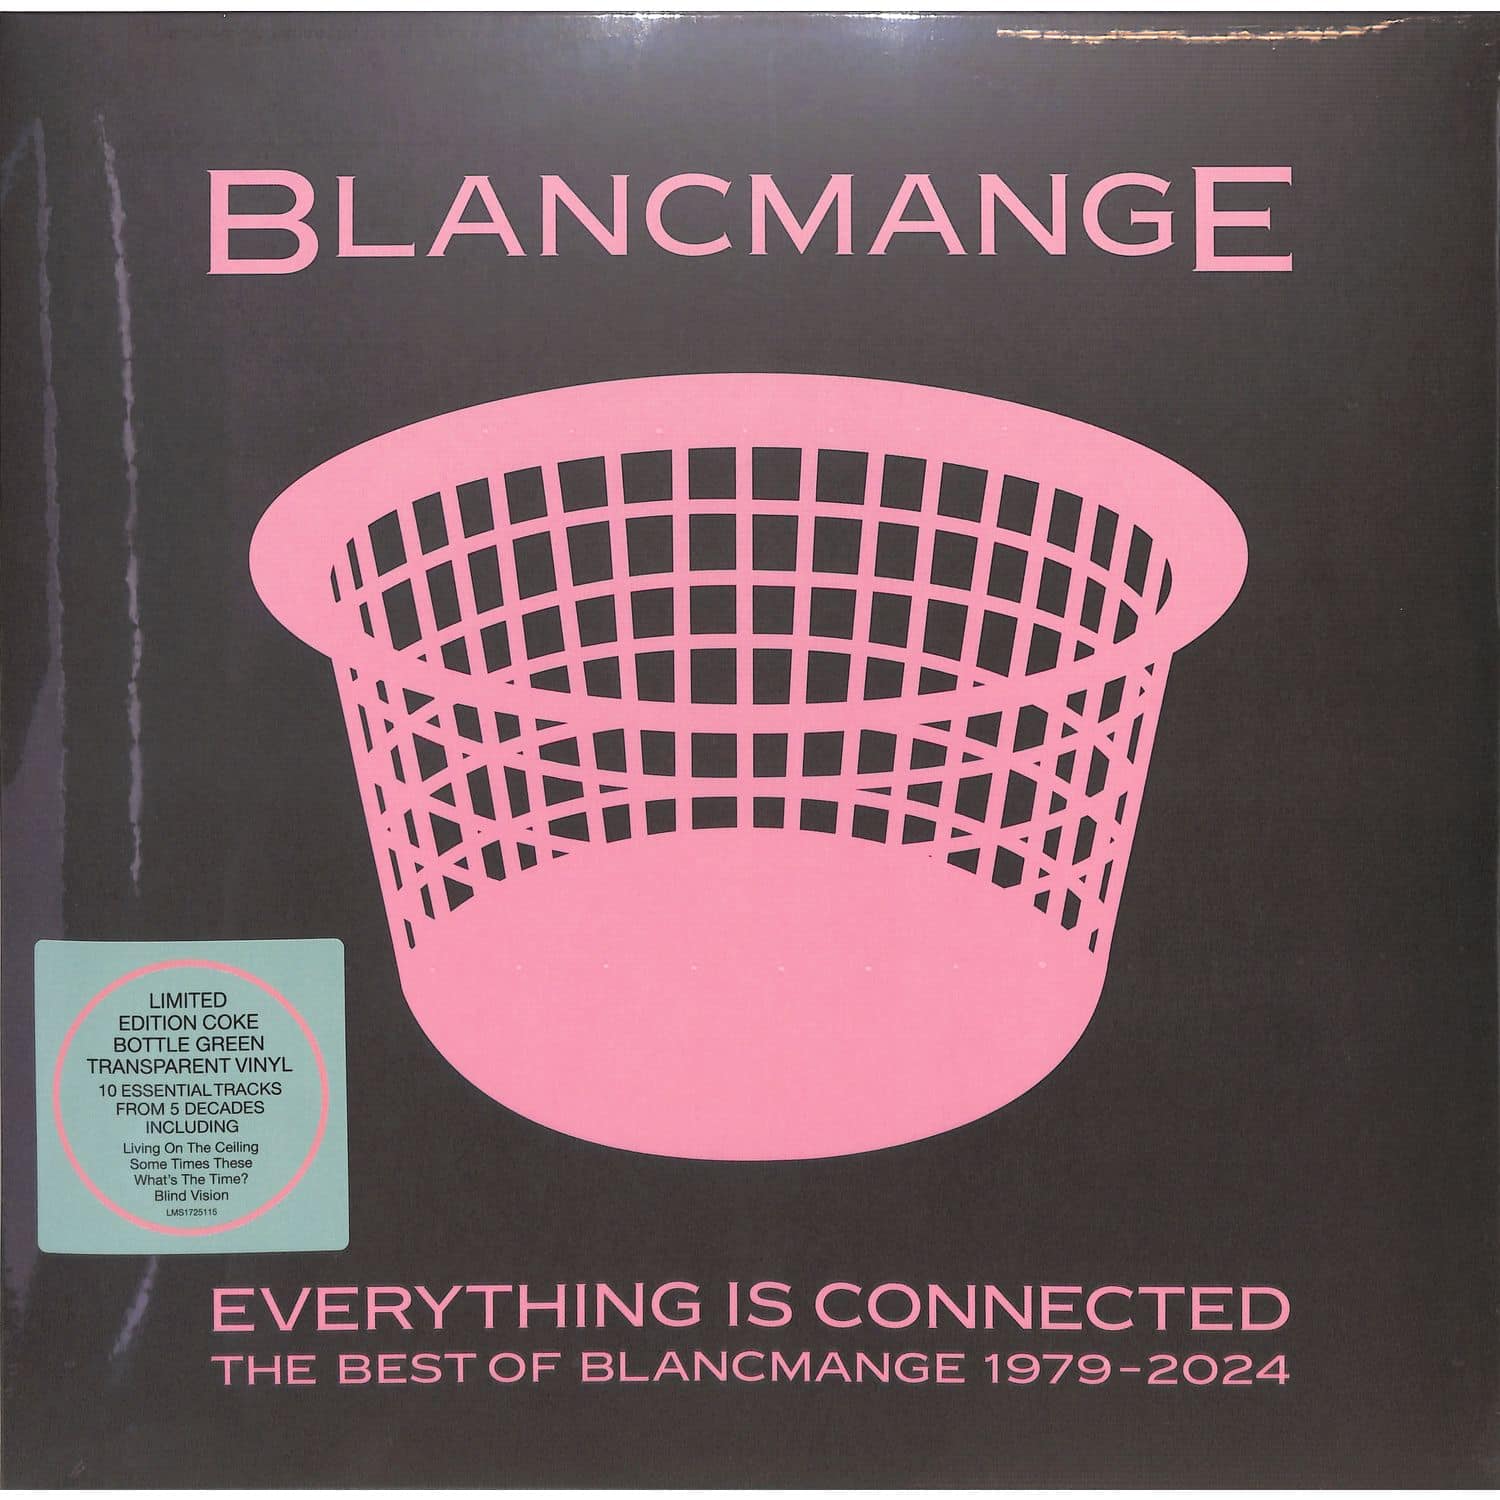 Blancmange - EVERYTHING IS CONNECTED - BEST OF 